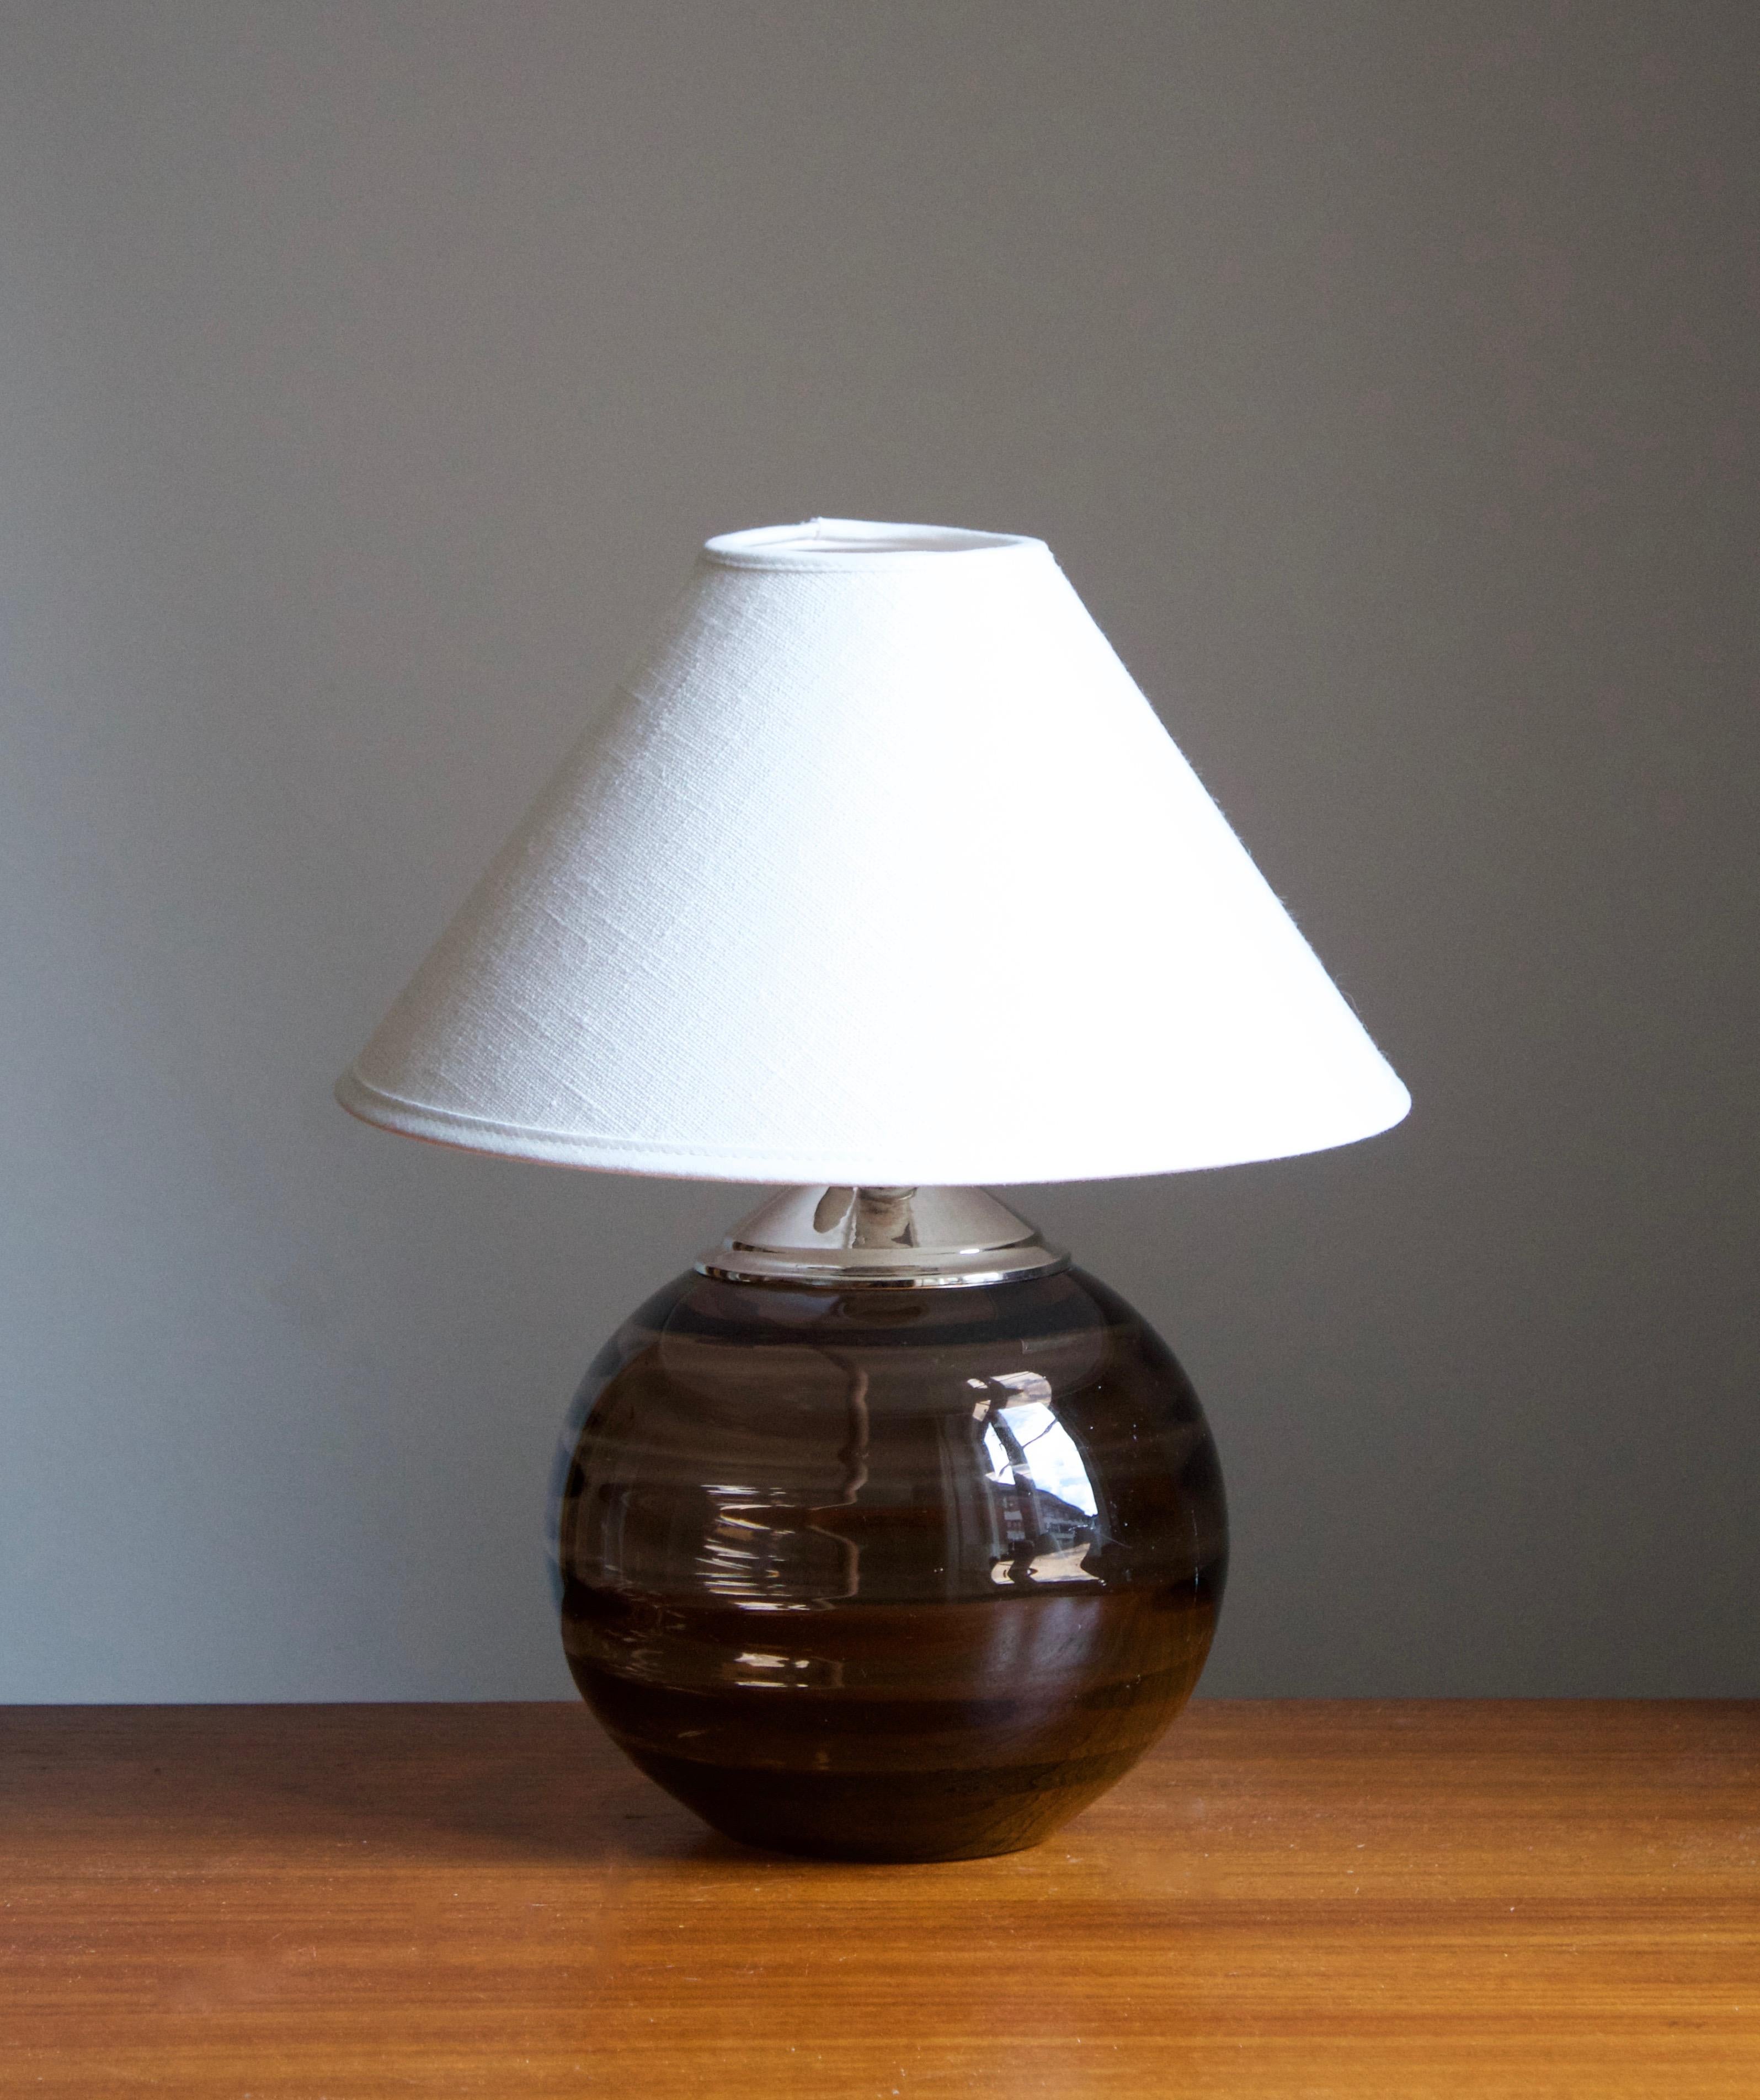 A modernist table lamp, design attributed to Edward Hald. Production attributed to Orrefors, c. 1930s.

Stated dimensions exclude lampshade. Height includes socket. Upon request and pending availability, illustrated lampshade can be included in